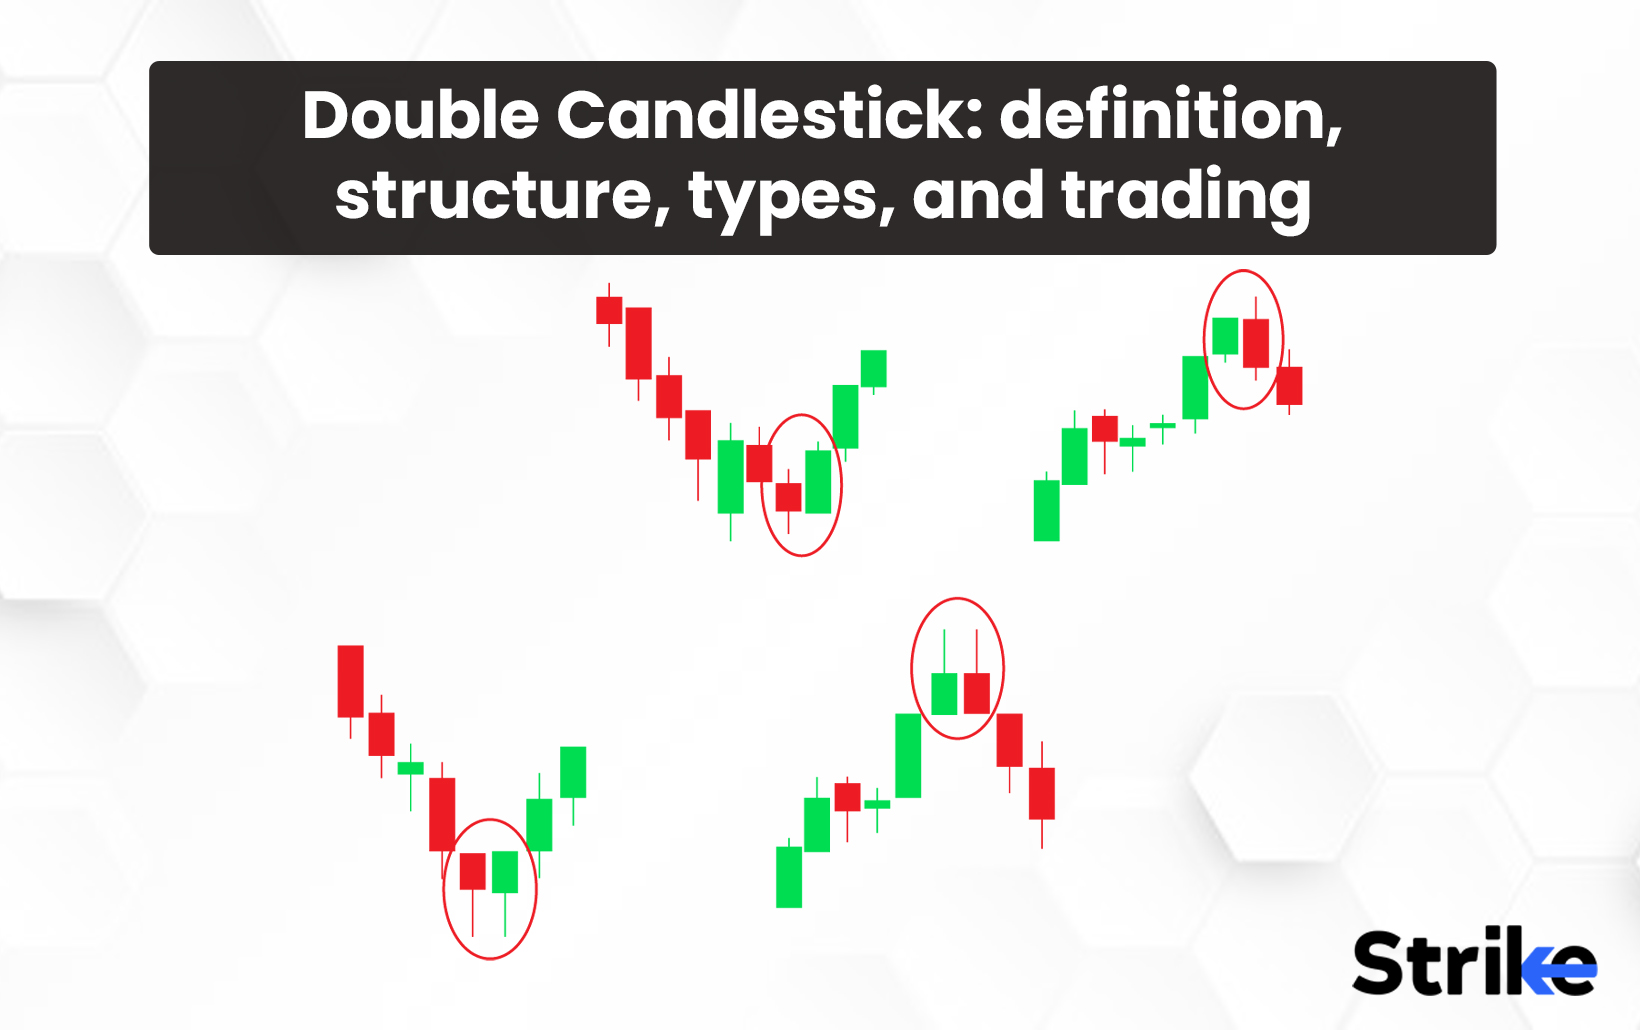 Double Candlestick: definition, structure, types, and trading